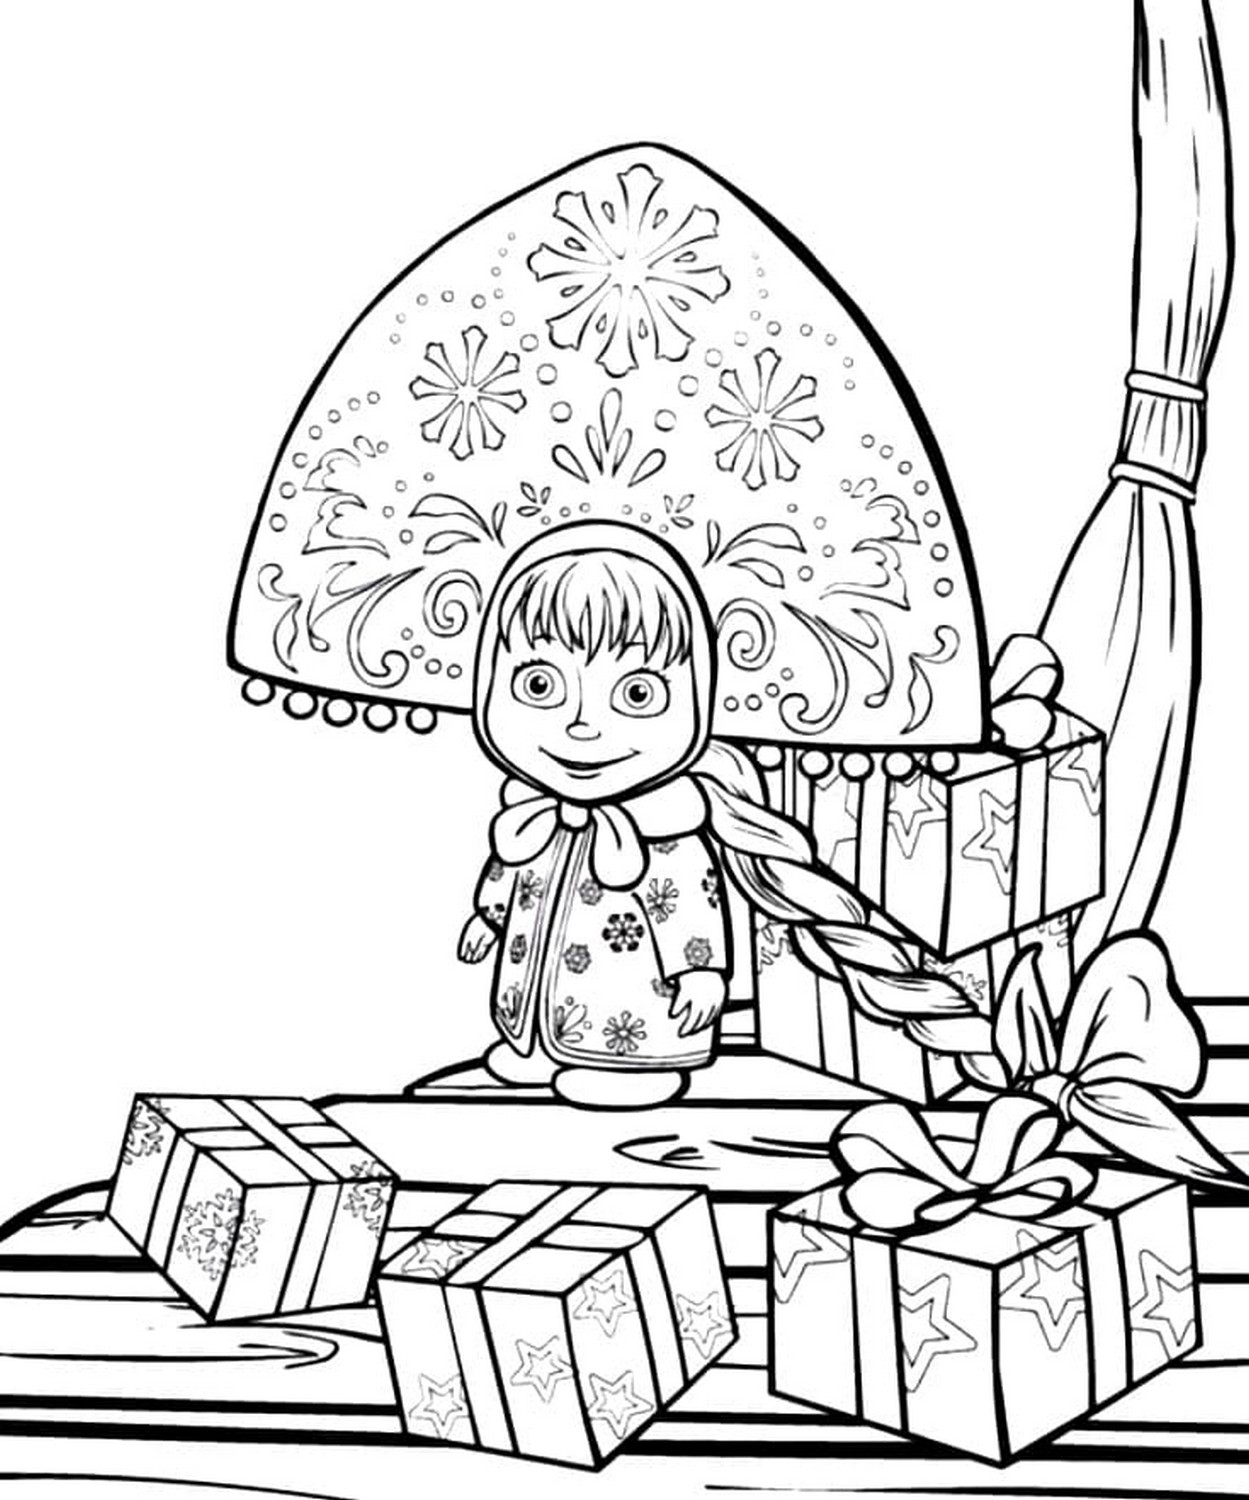 Mascha und der Br 14  coloring page to print and coloring